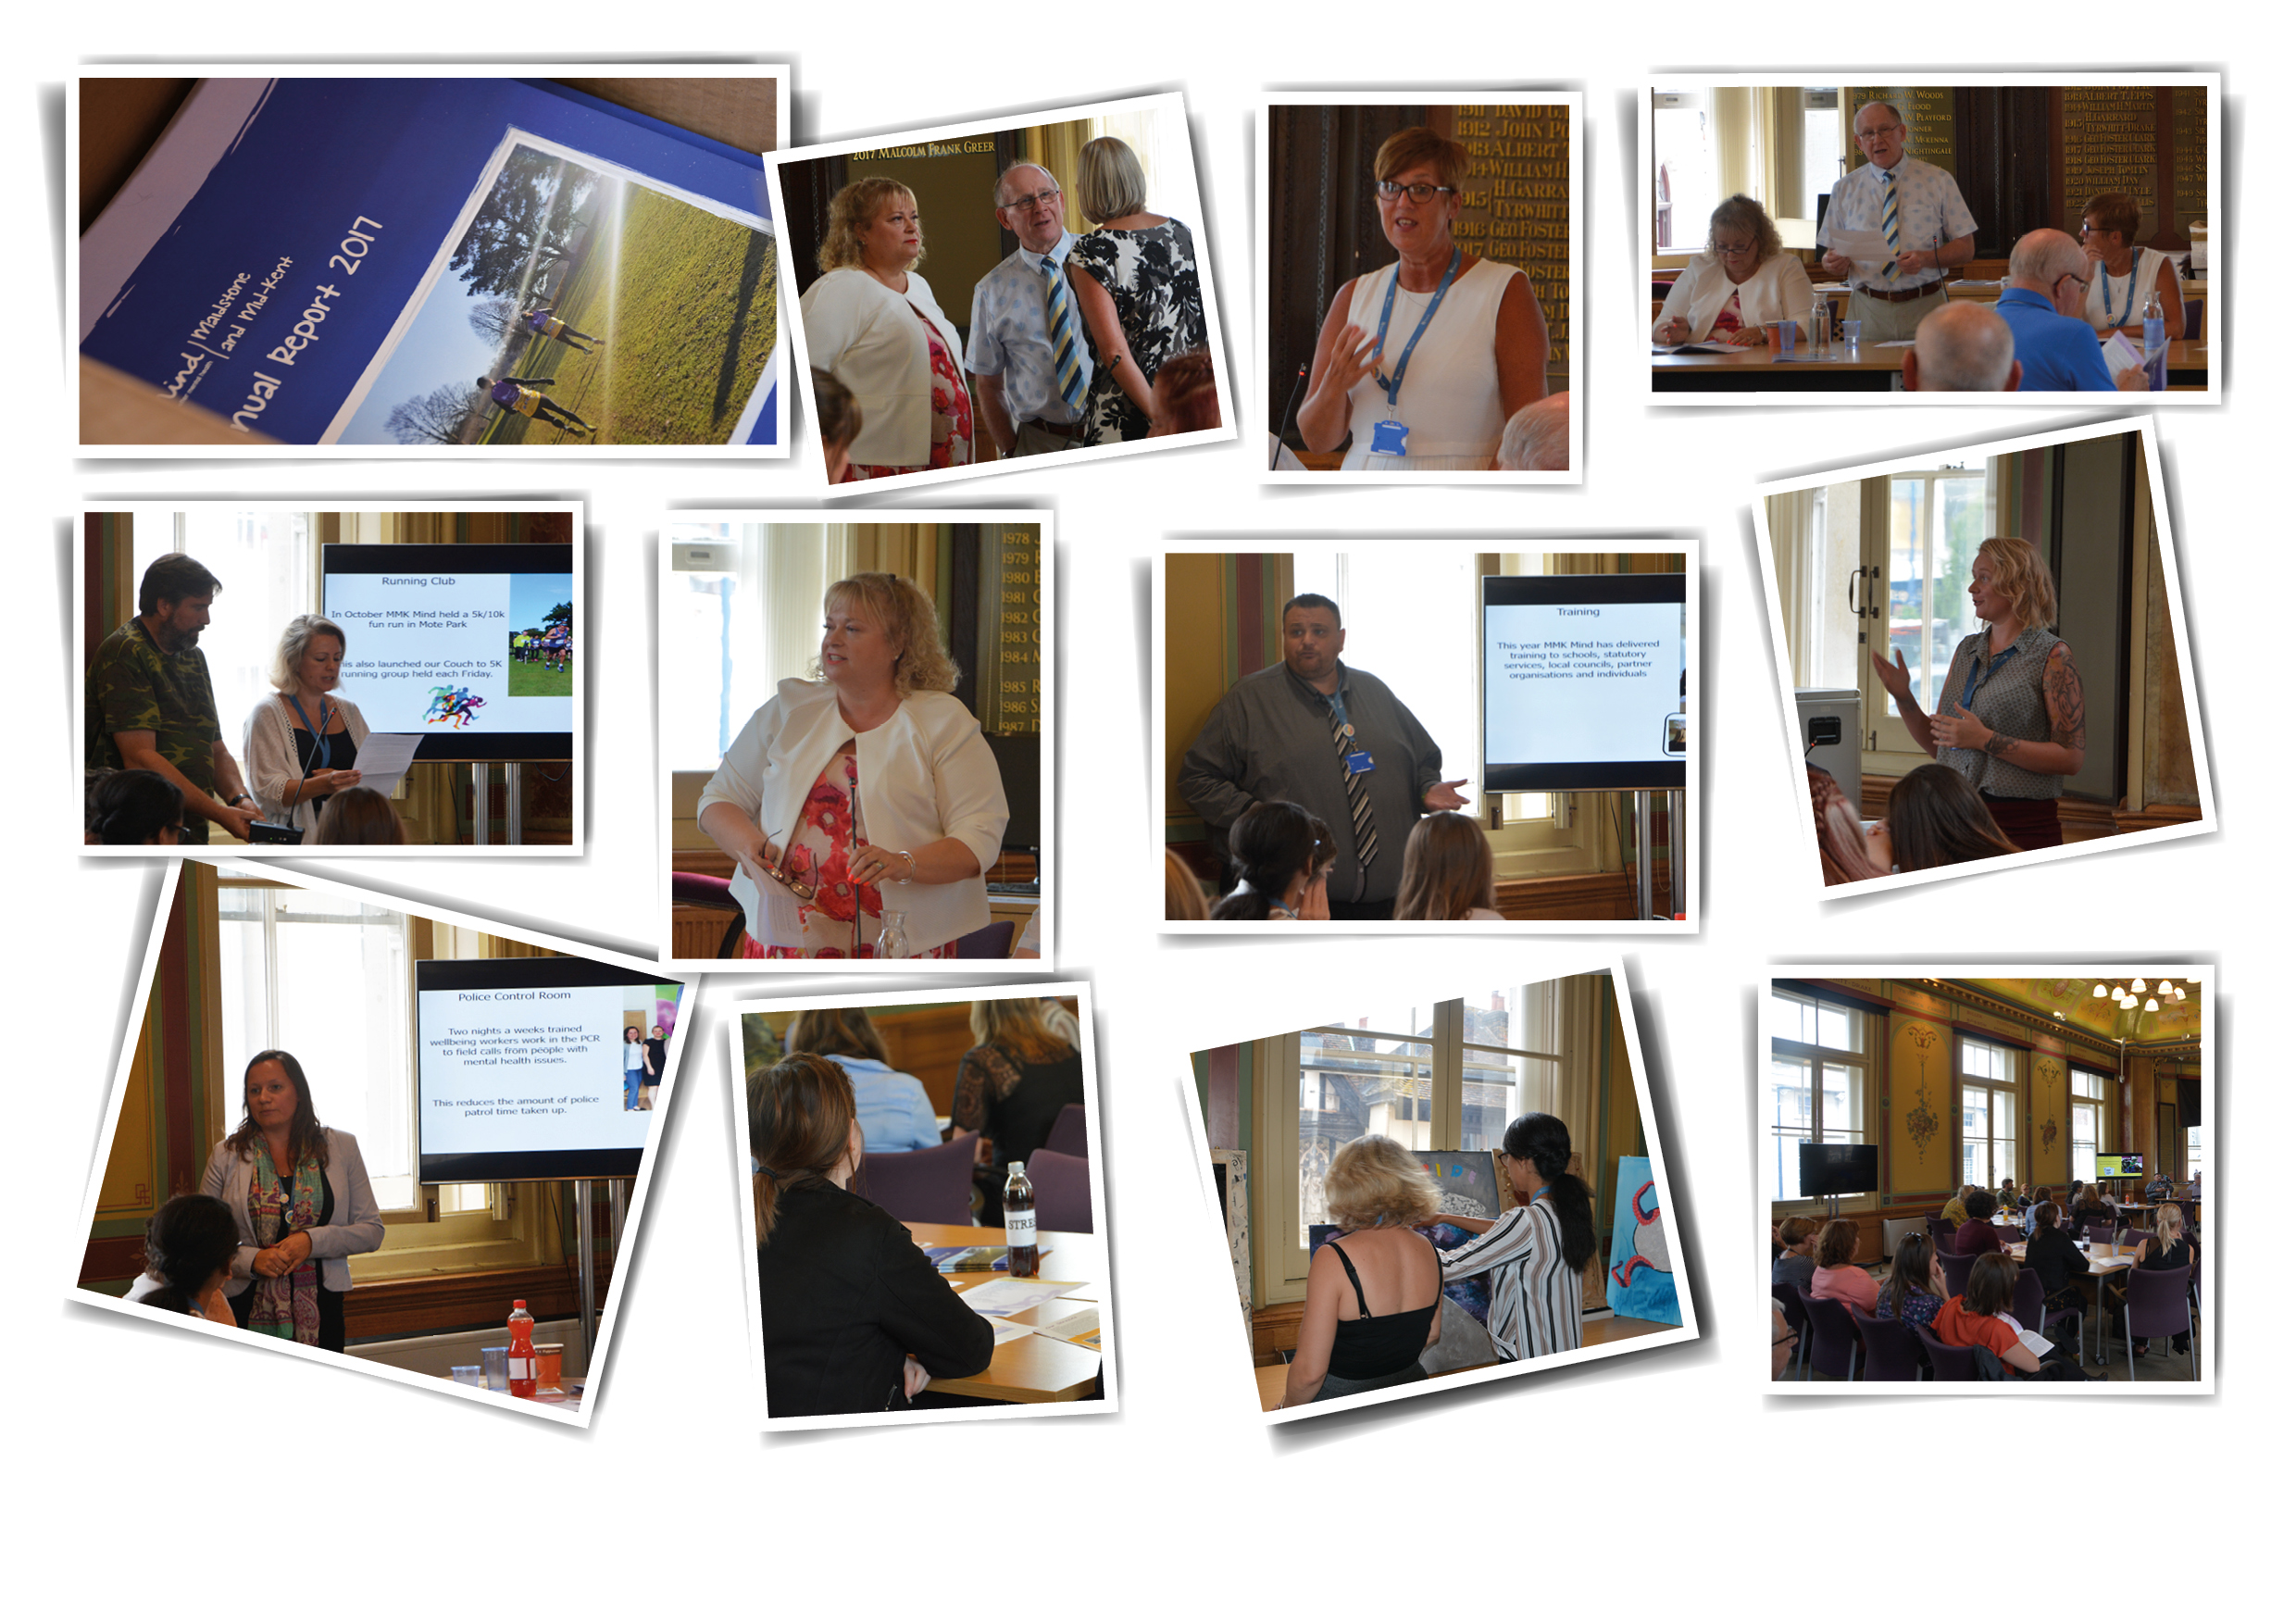 2017 AGM In Maidstone - Photographs from our 2017 AGM. A photograph of Annual Reports. A photograph of trustees Sue, Tim and Hazel. A photograph of Julie Blackmore giving a speech. A photograph of Tim giving a speech. A photograph of Heidi and service user Jonathan giving a presentation about the Fun Run. A photograph of Sue giving a speech. A photograph of James giving a presentation. A photograph of Kelly giving a speech. A photograph of Kimberley giving a presentation. Photographs of the audience.